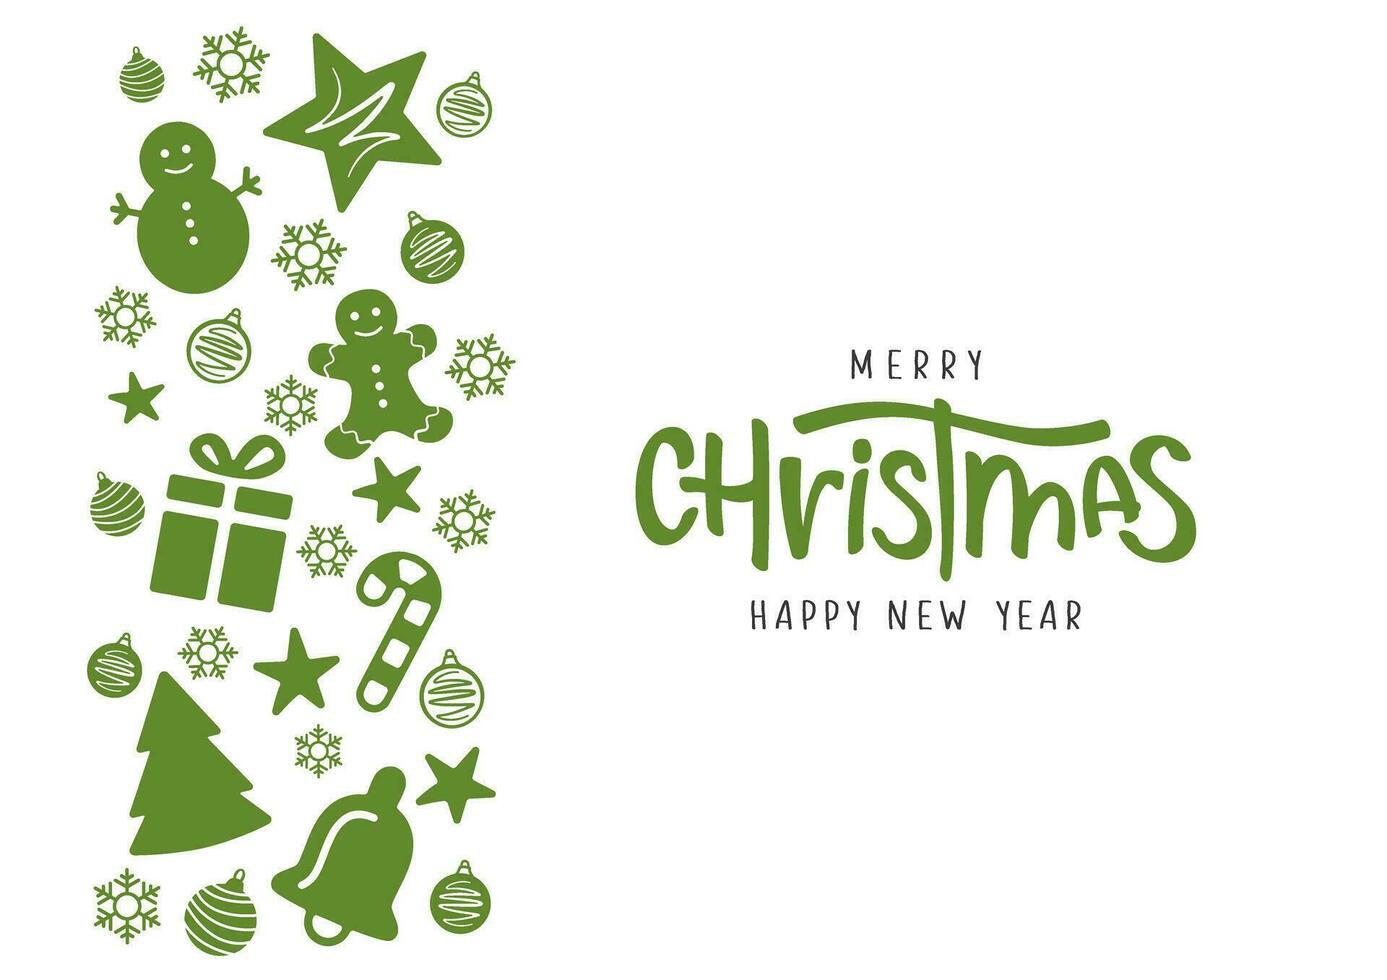 Merry Christmas and Happy New Year lettering with christmas decorations. Christmas card concept vector